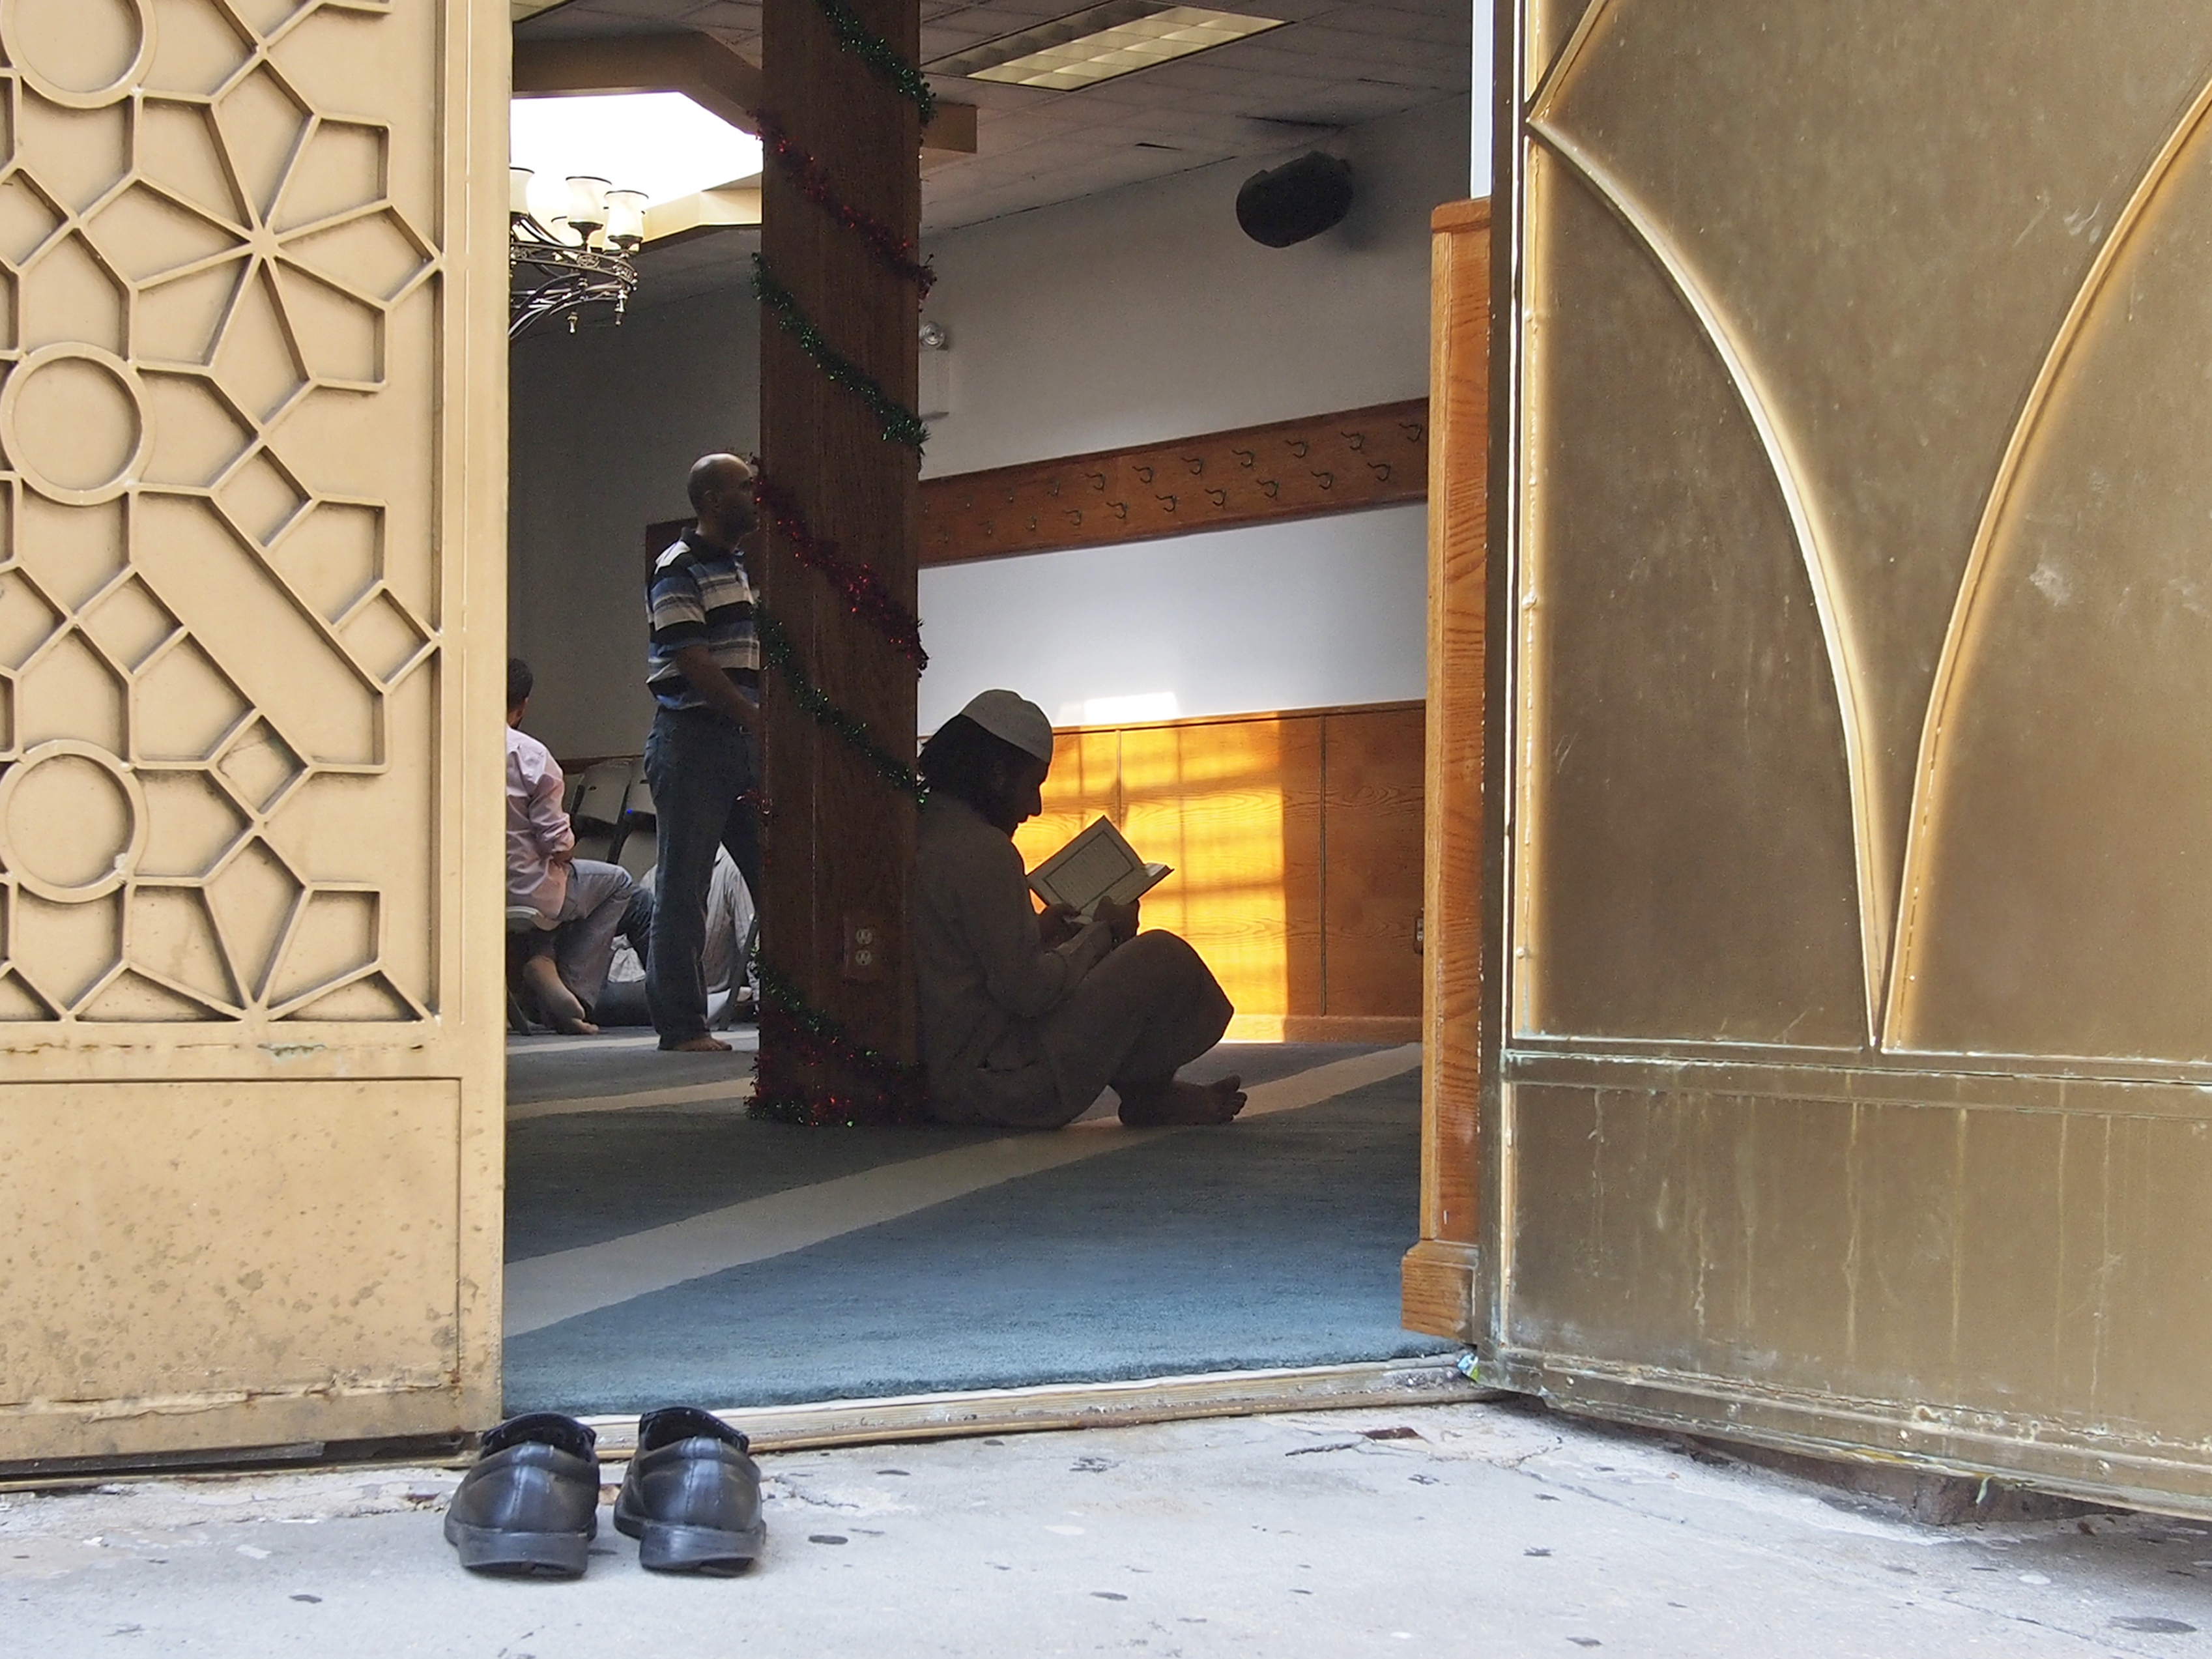 In this photo taken in 2011, worshippers are pictured inside the Al-Iman Mosque after midday prayers in the Queens borough of New York. The NYPD disbanded the special unit tasked with carrying out surveillance of Muslim groups in 2014 (Photo by Charles Dharapak/Associated Press)